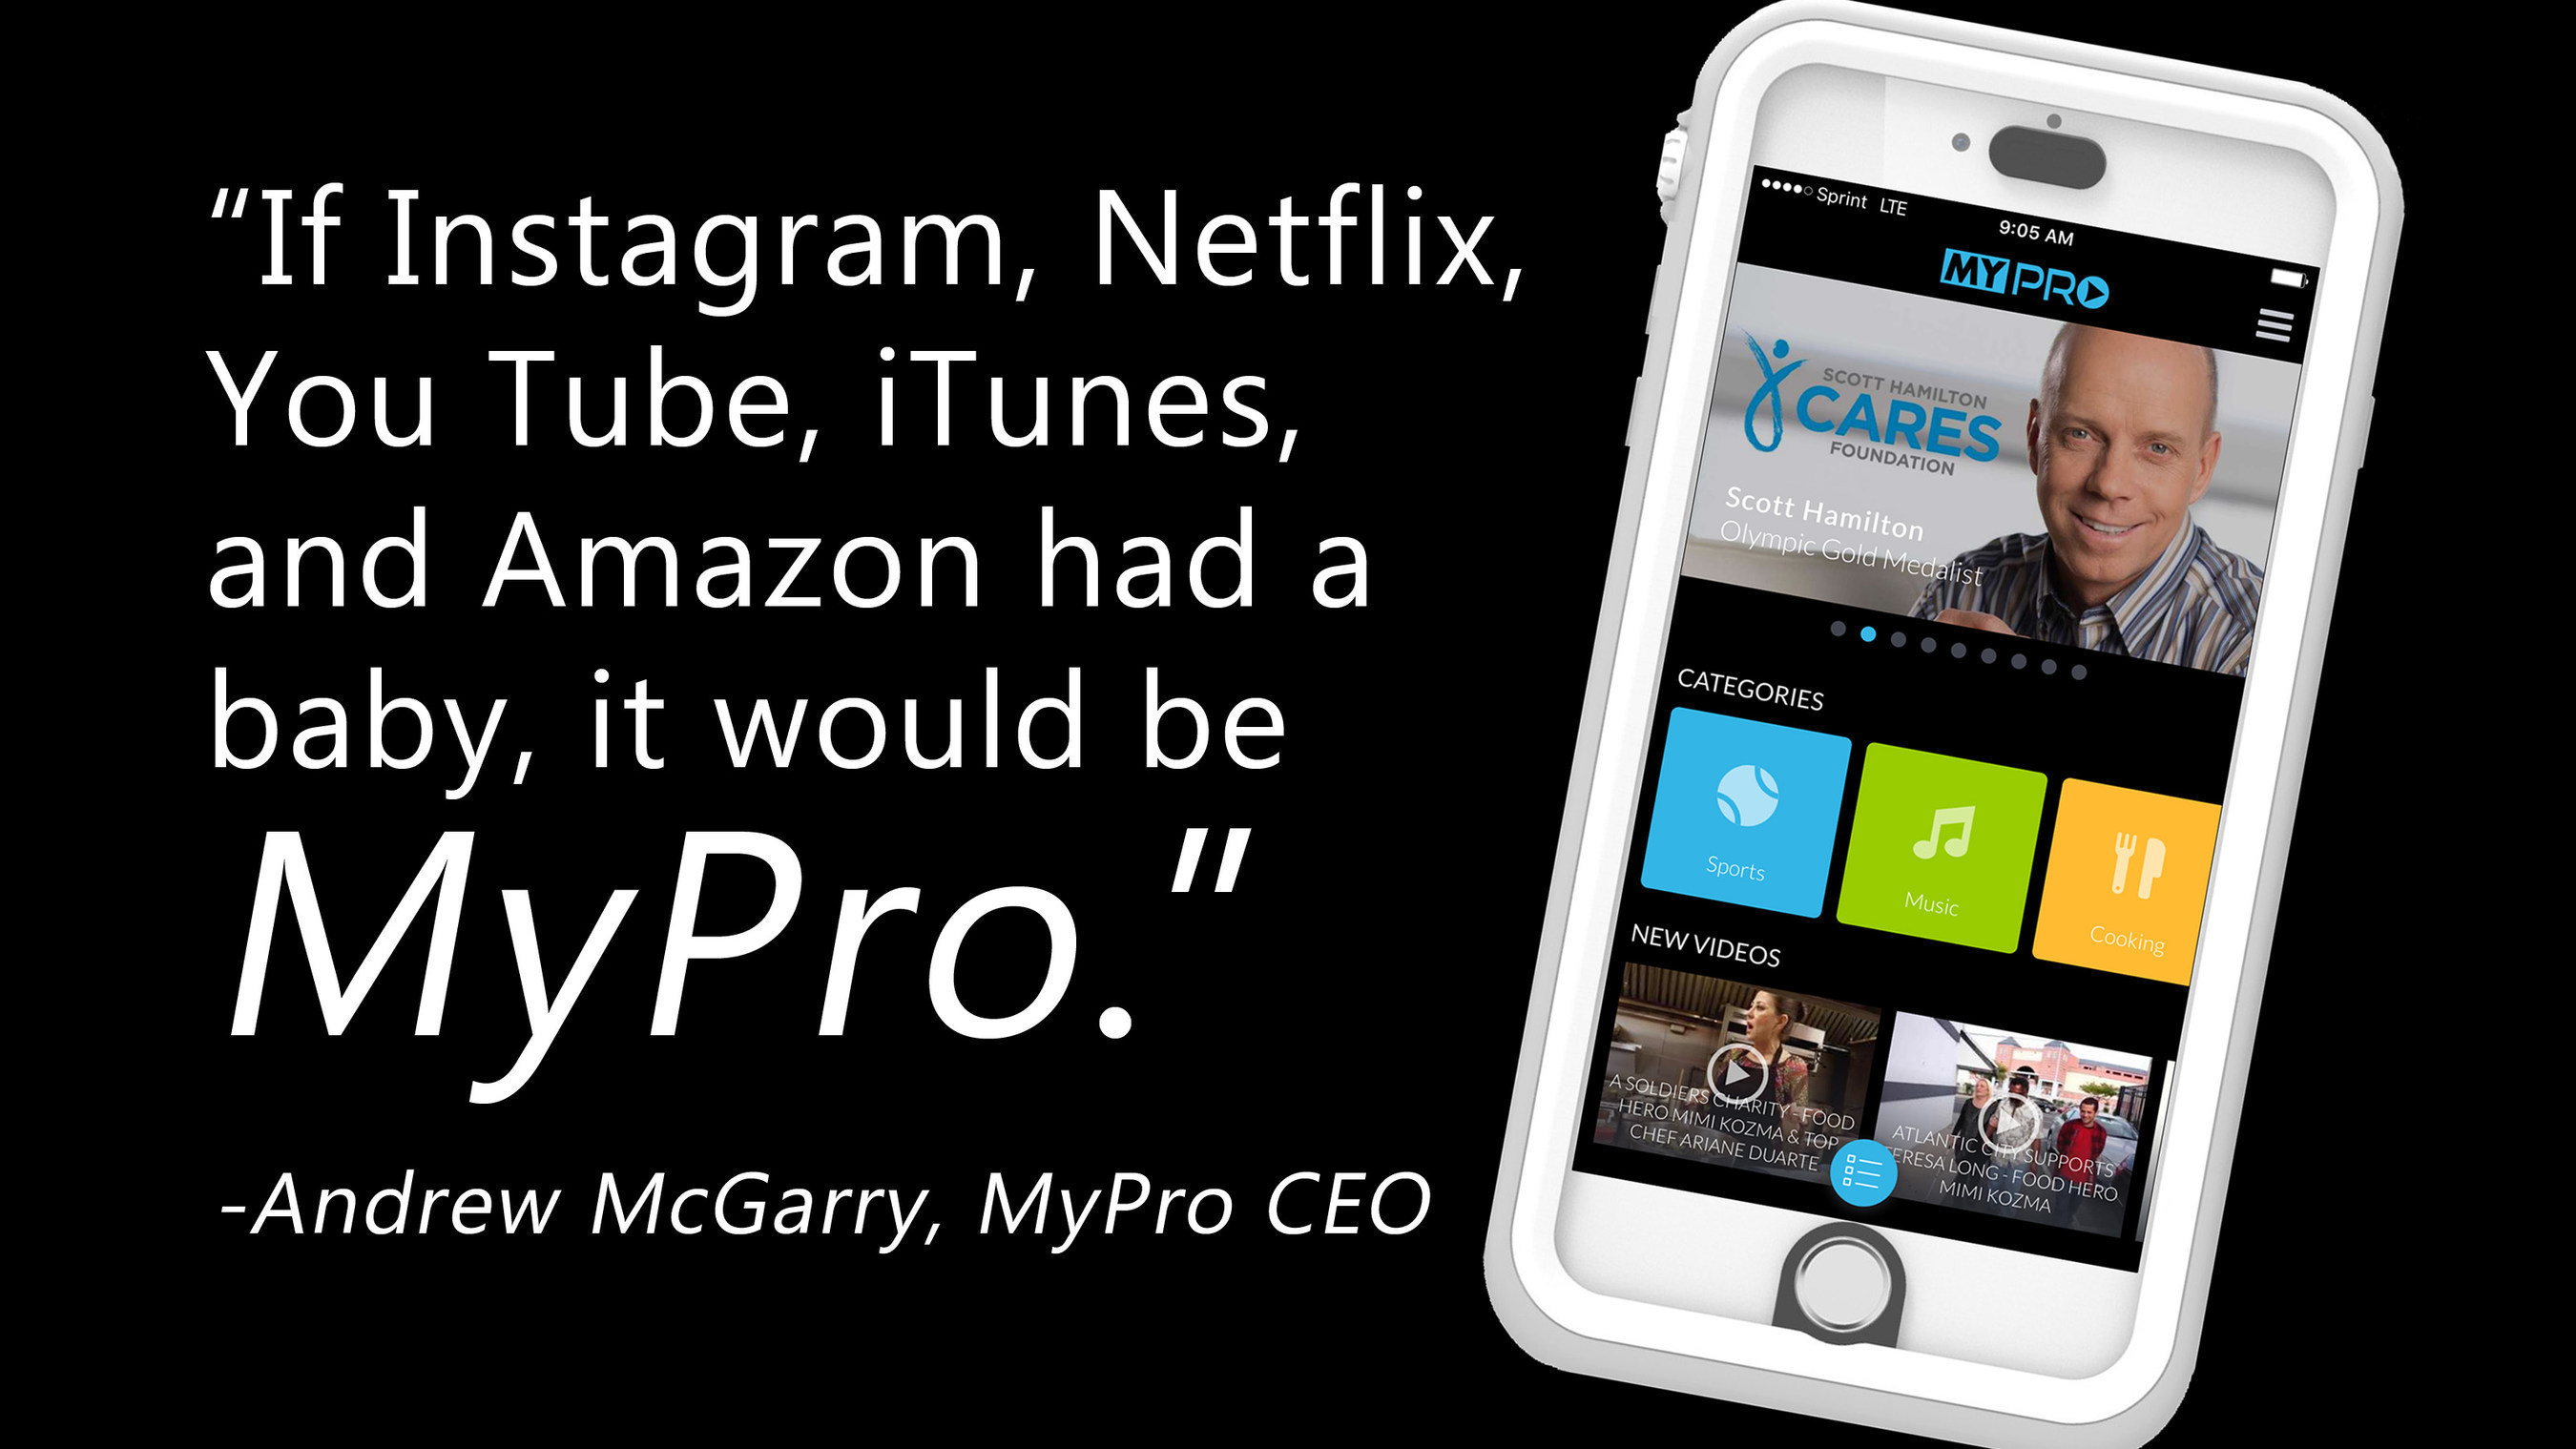 MyPro's website and apps create a compelling landscape for content creators globally.